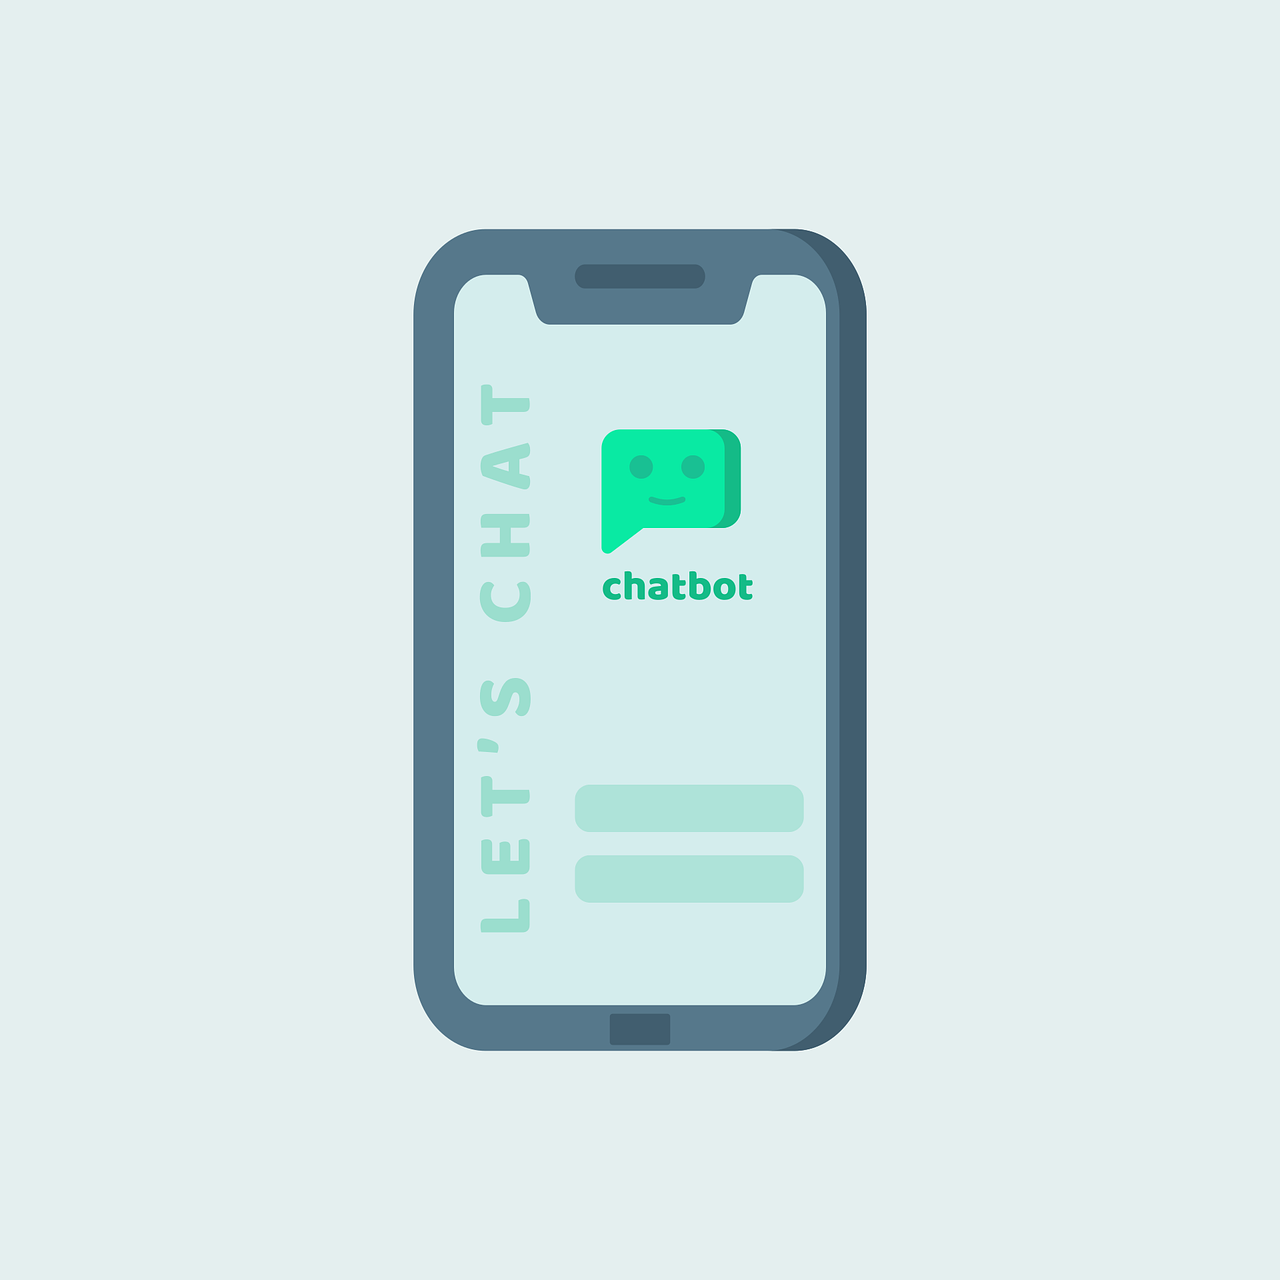 Ecommerce Chatbots: All You Need to Know